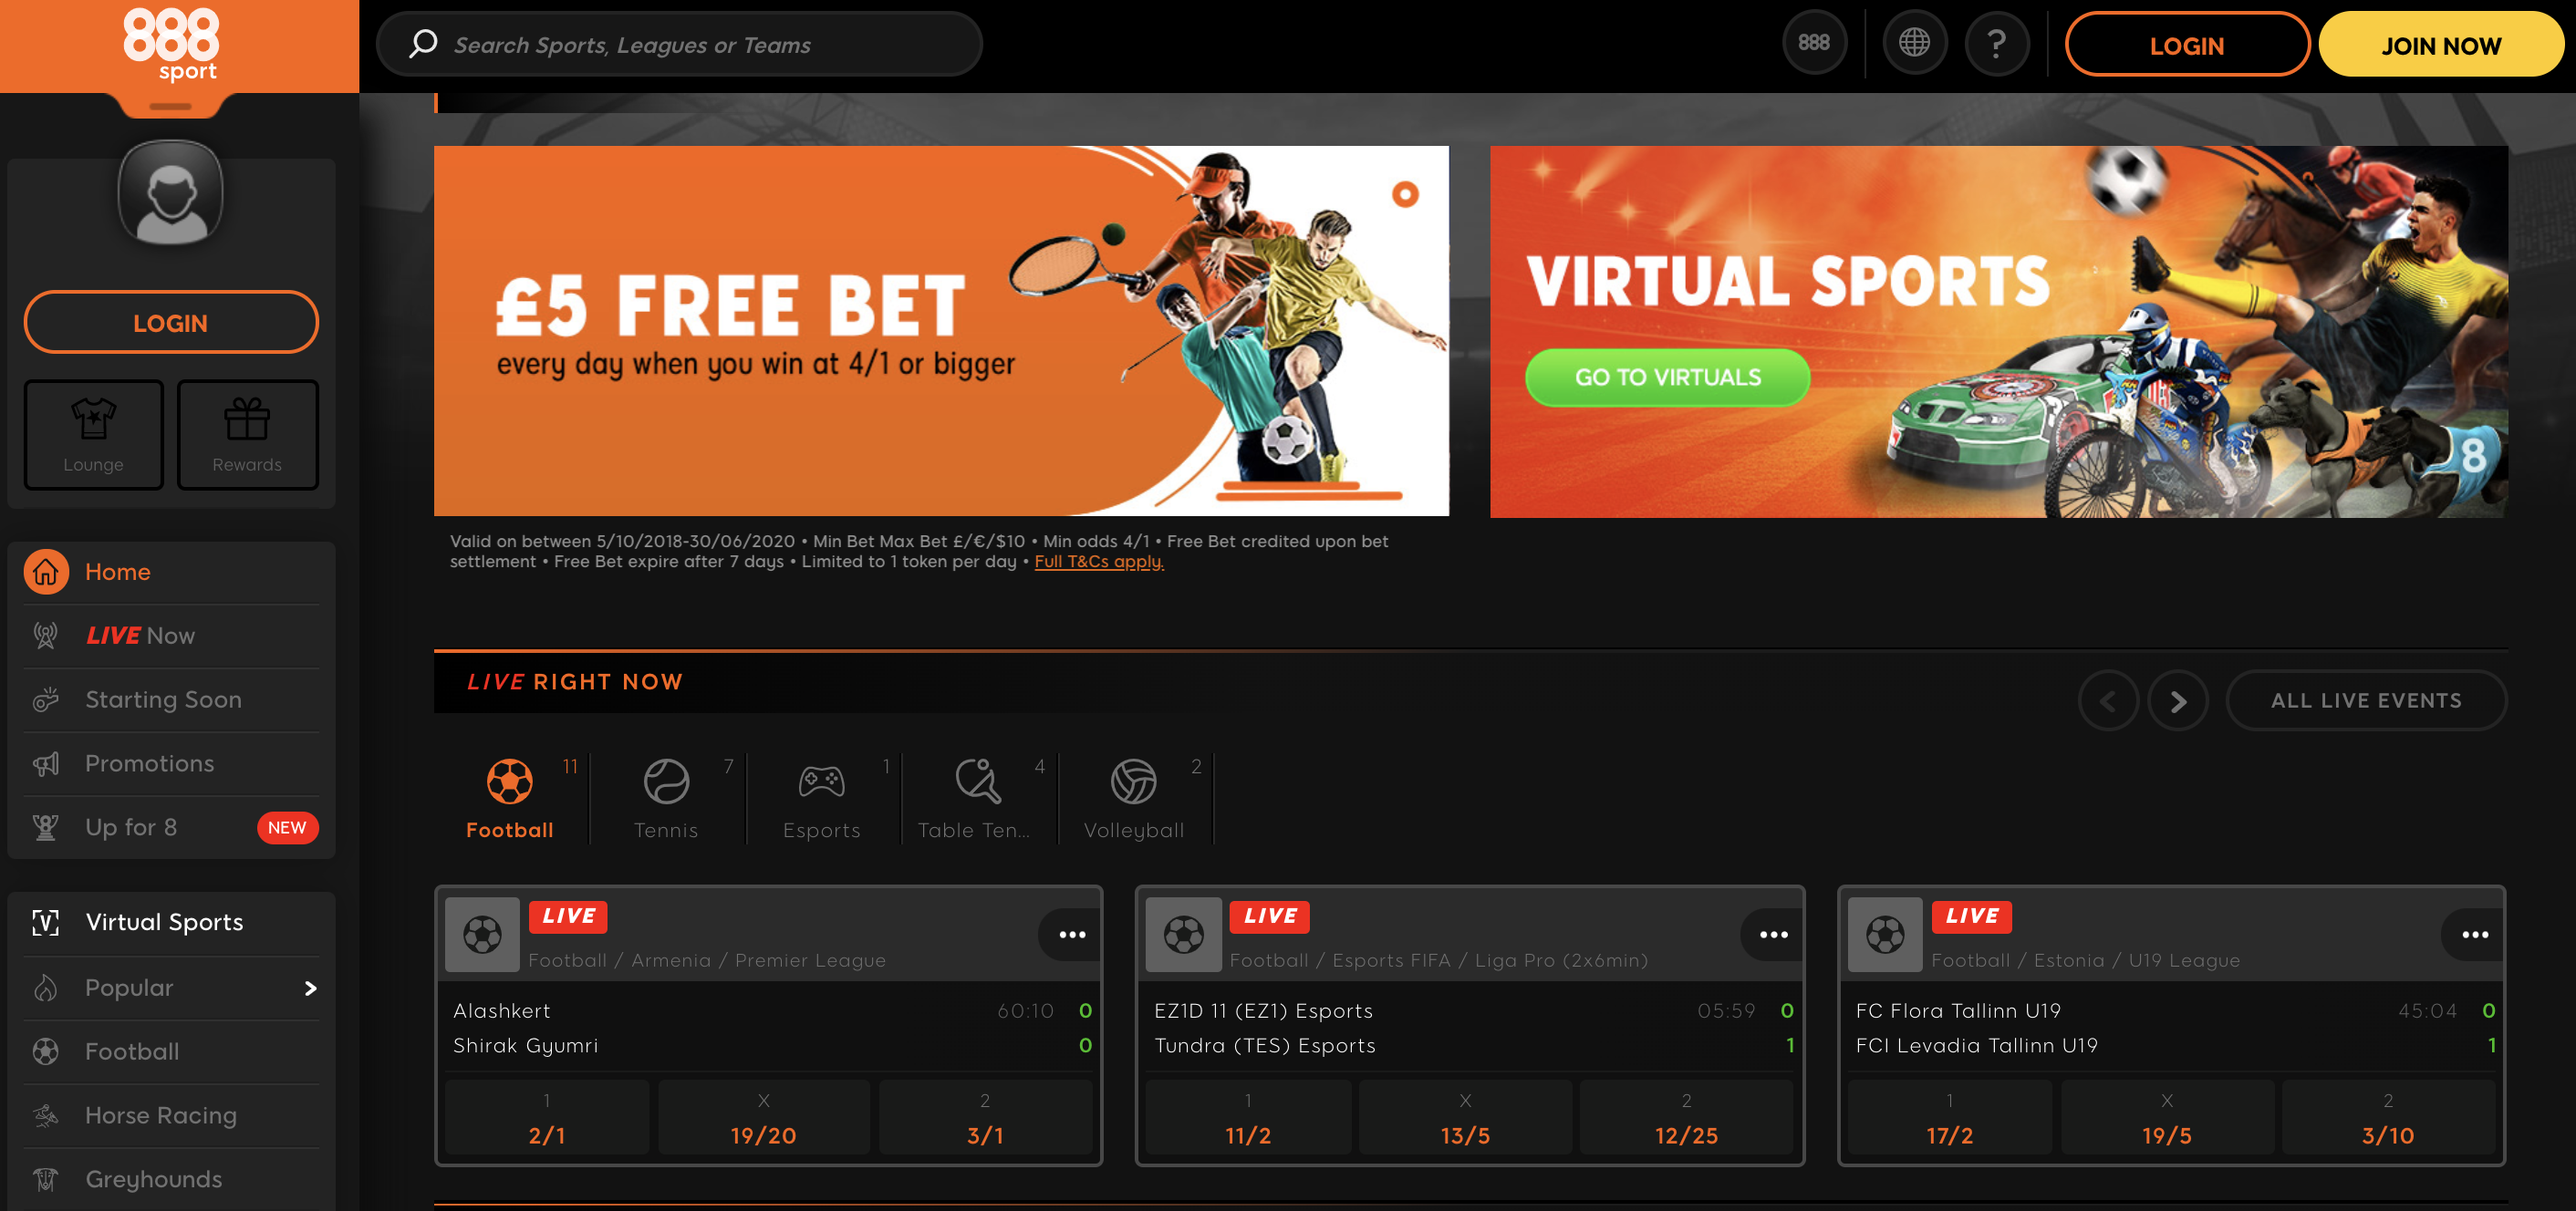 which betting site gives bonus on registration without deposit